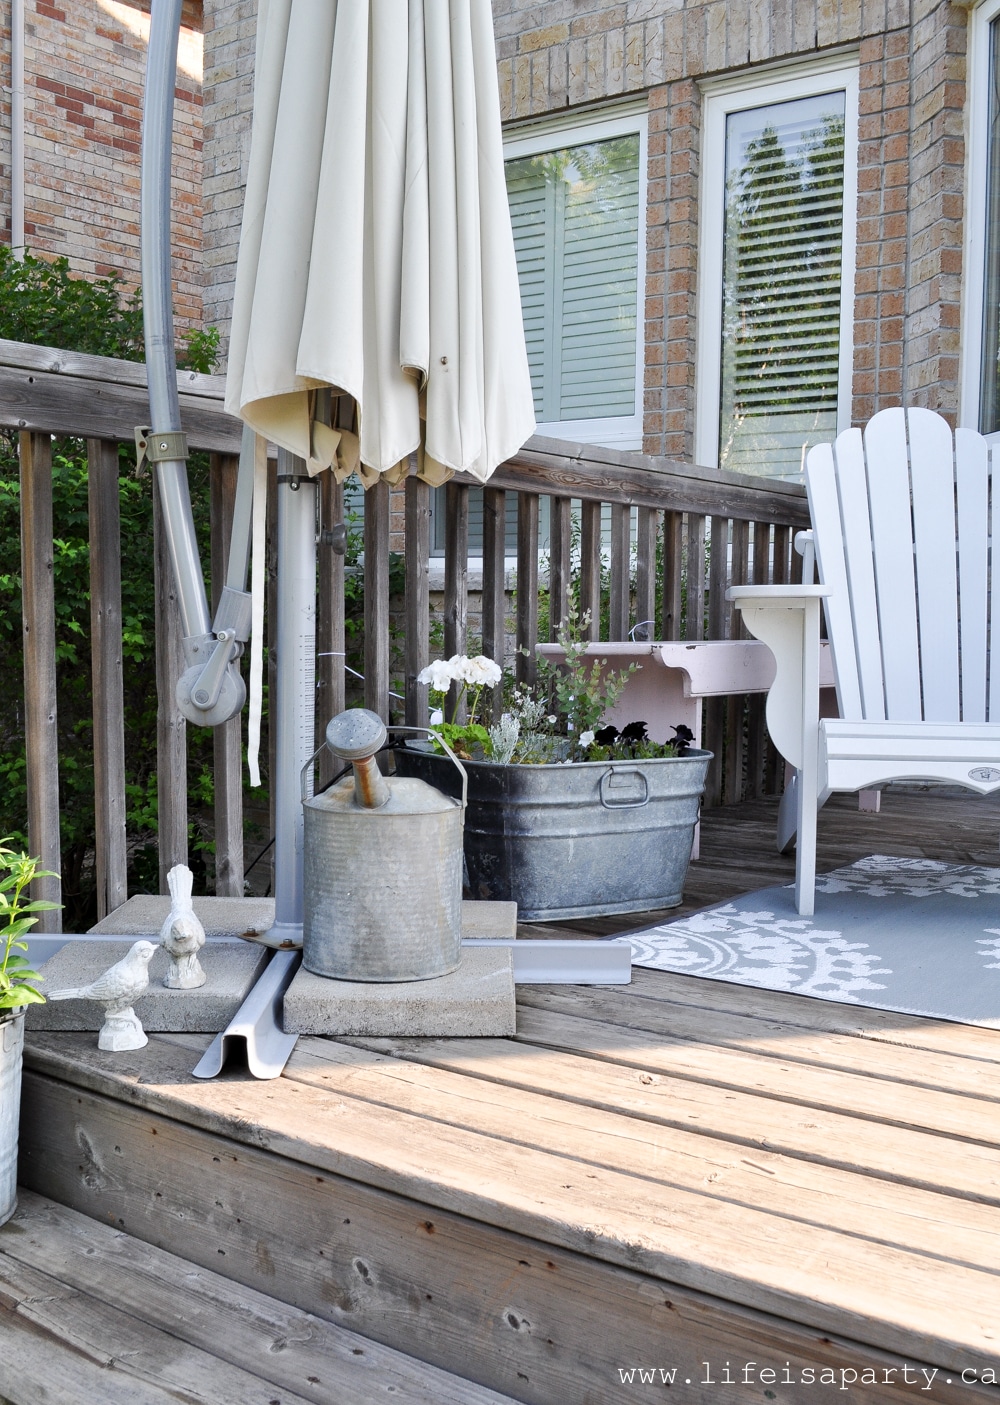 deck with Black and White container Gardens in vintage metal tubs and pails